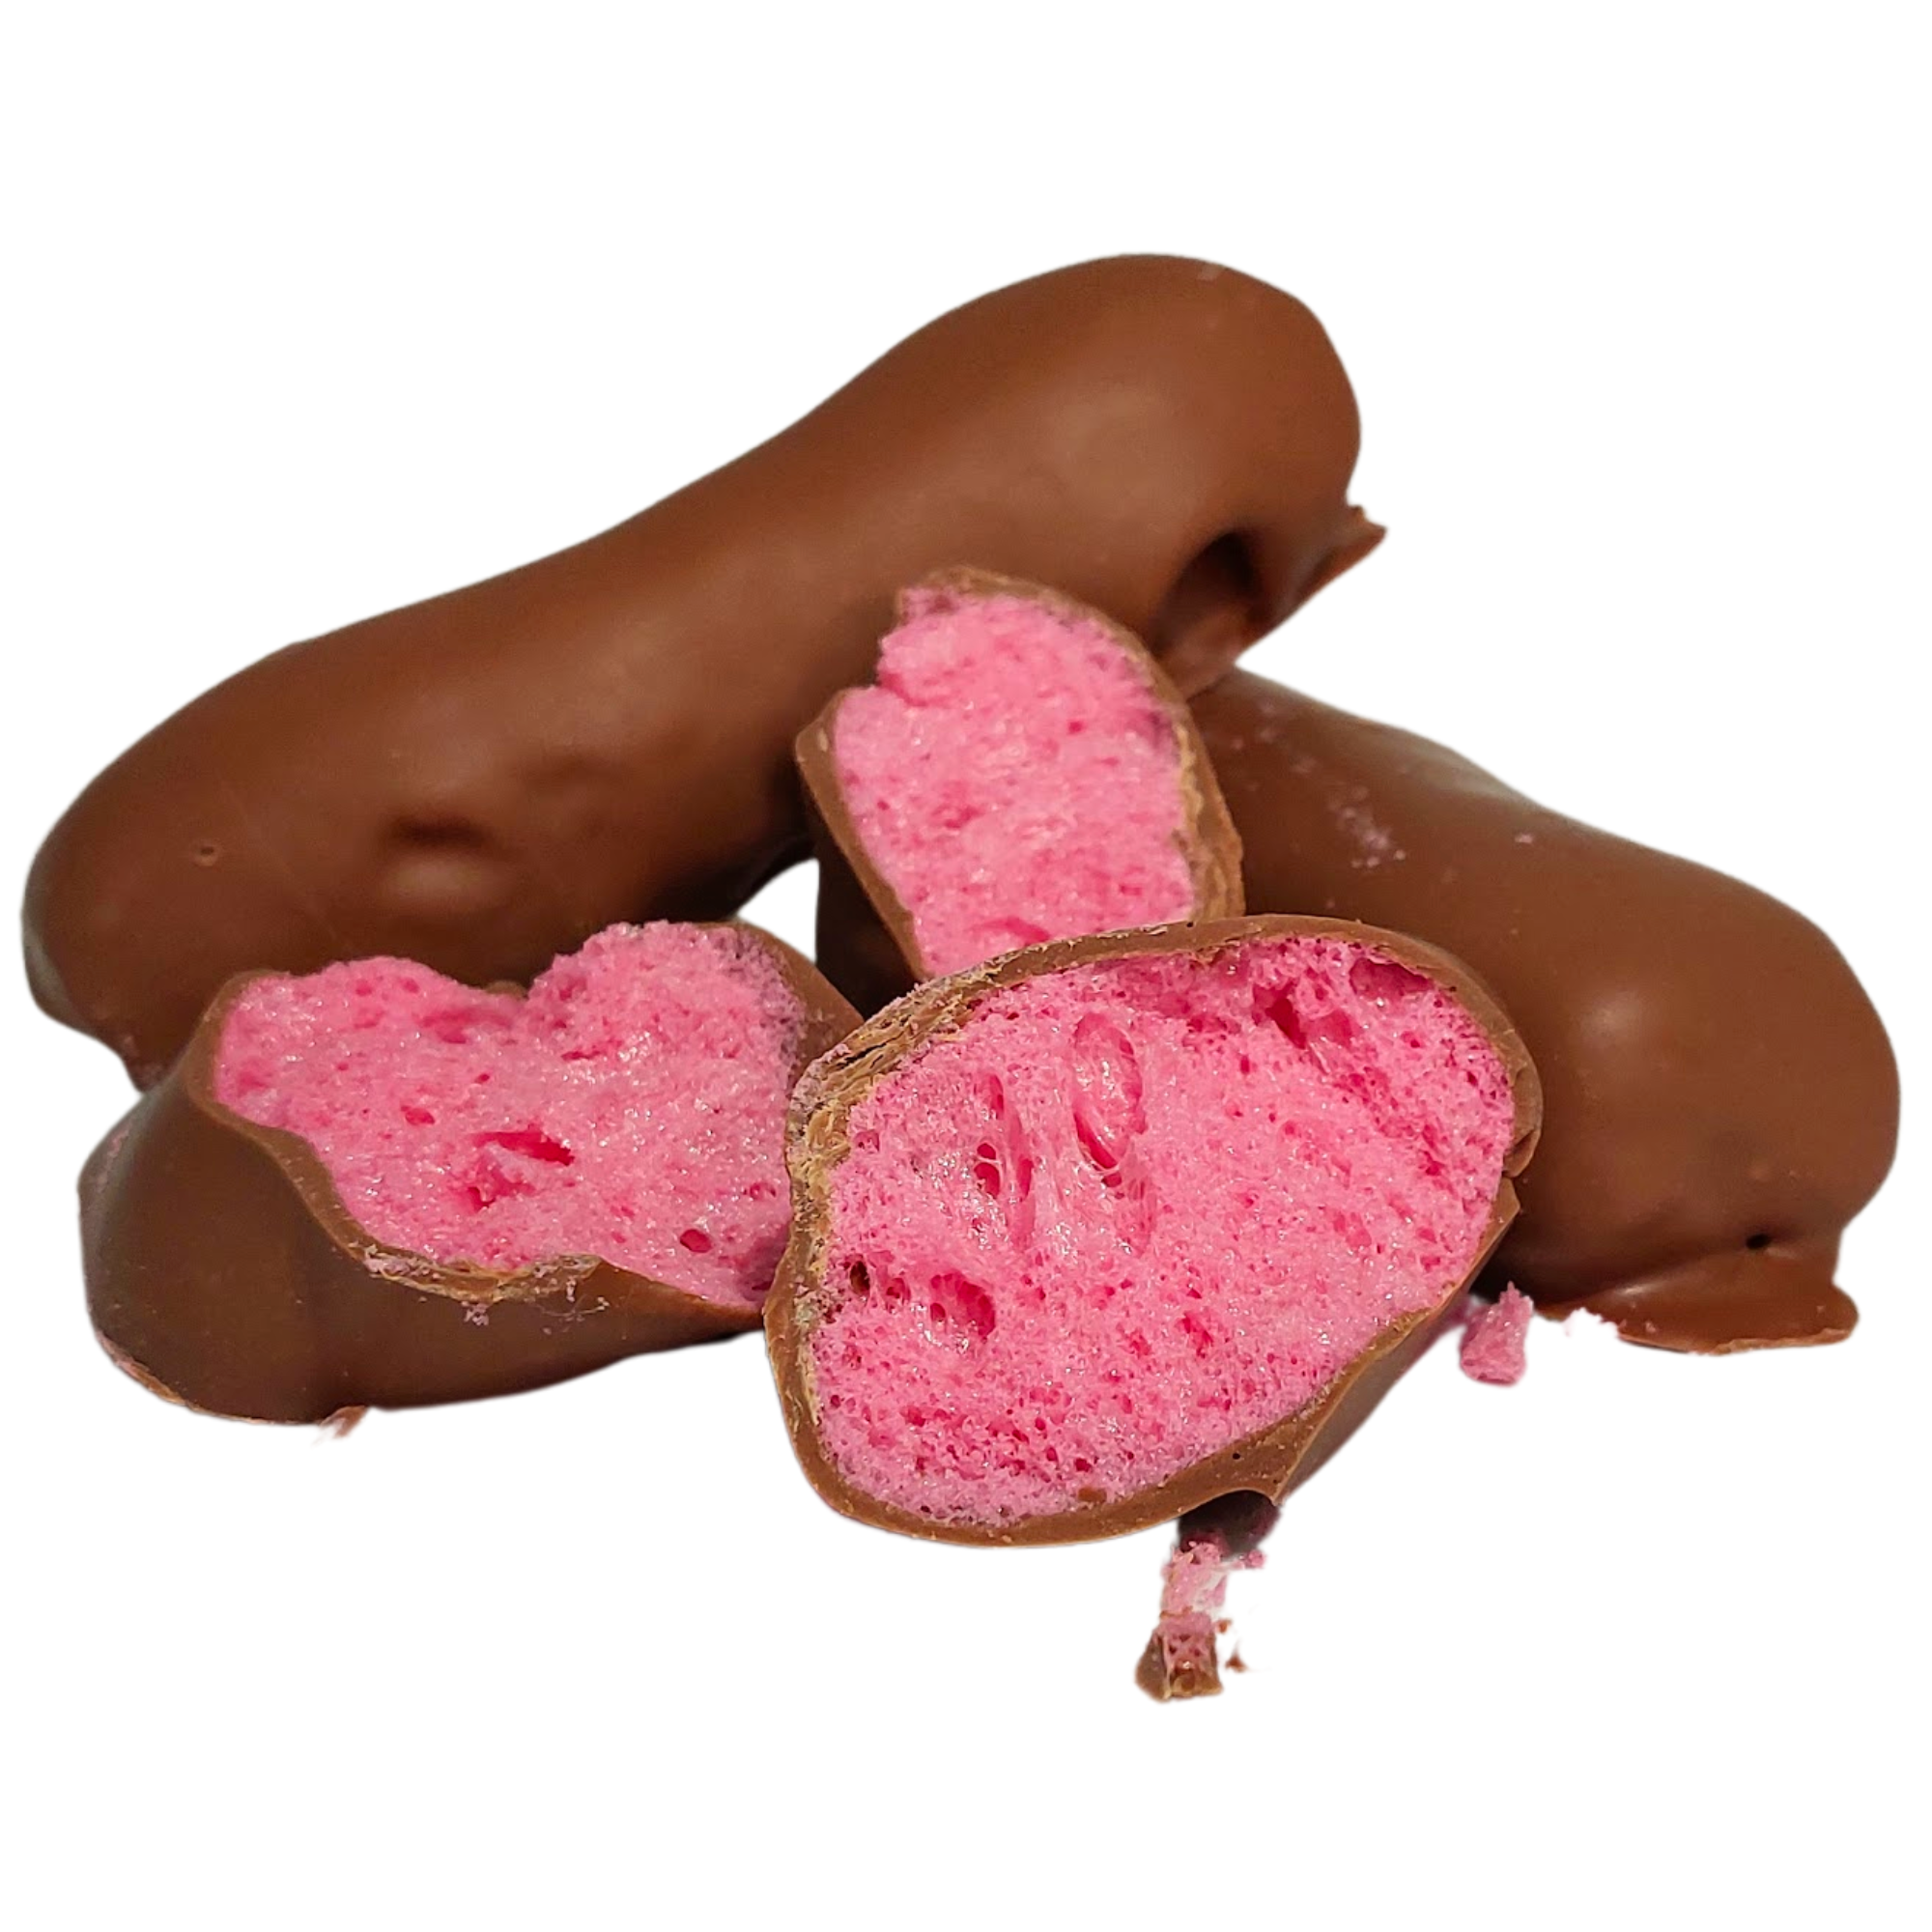 Frochies Red Ripper chocolate coated freeze dried lollies